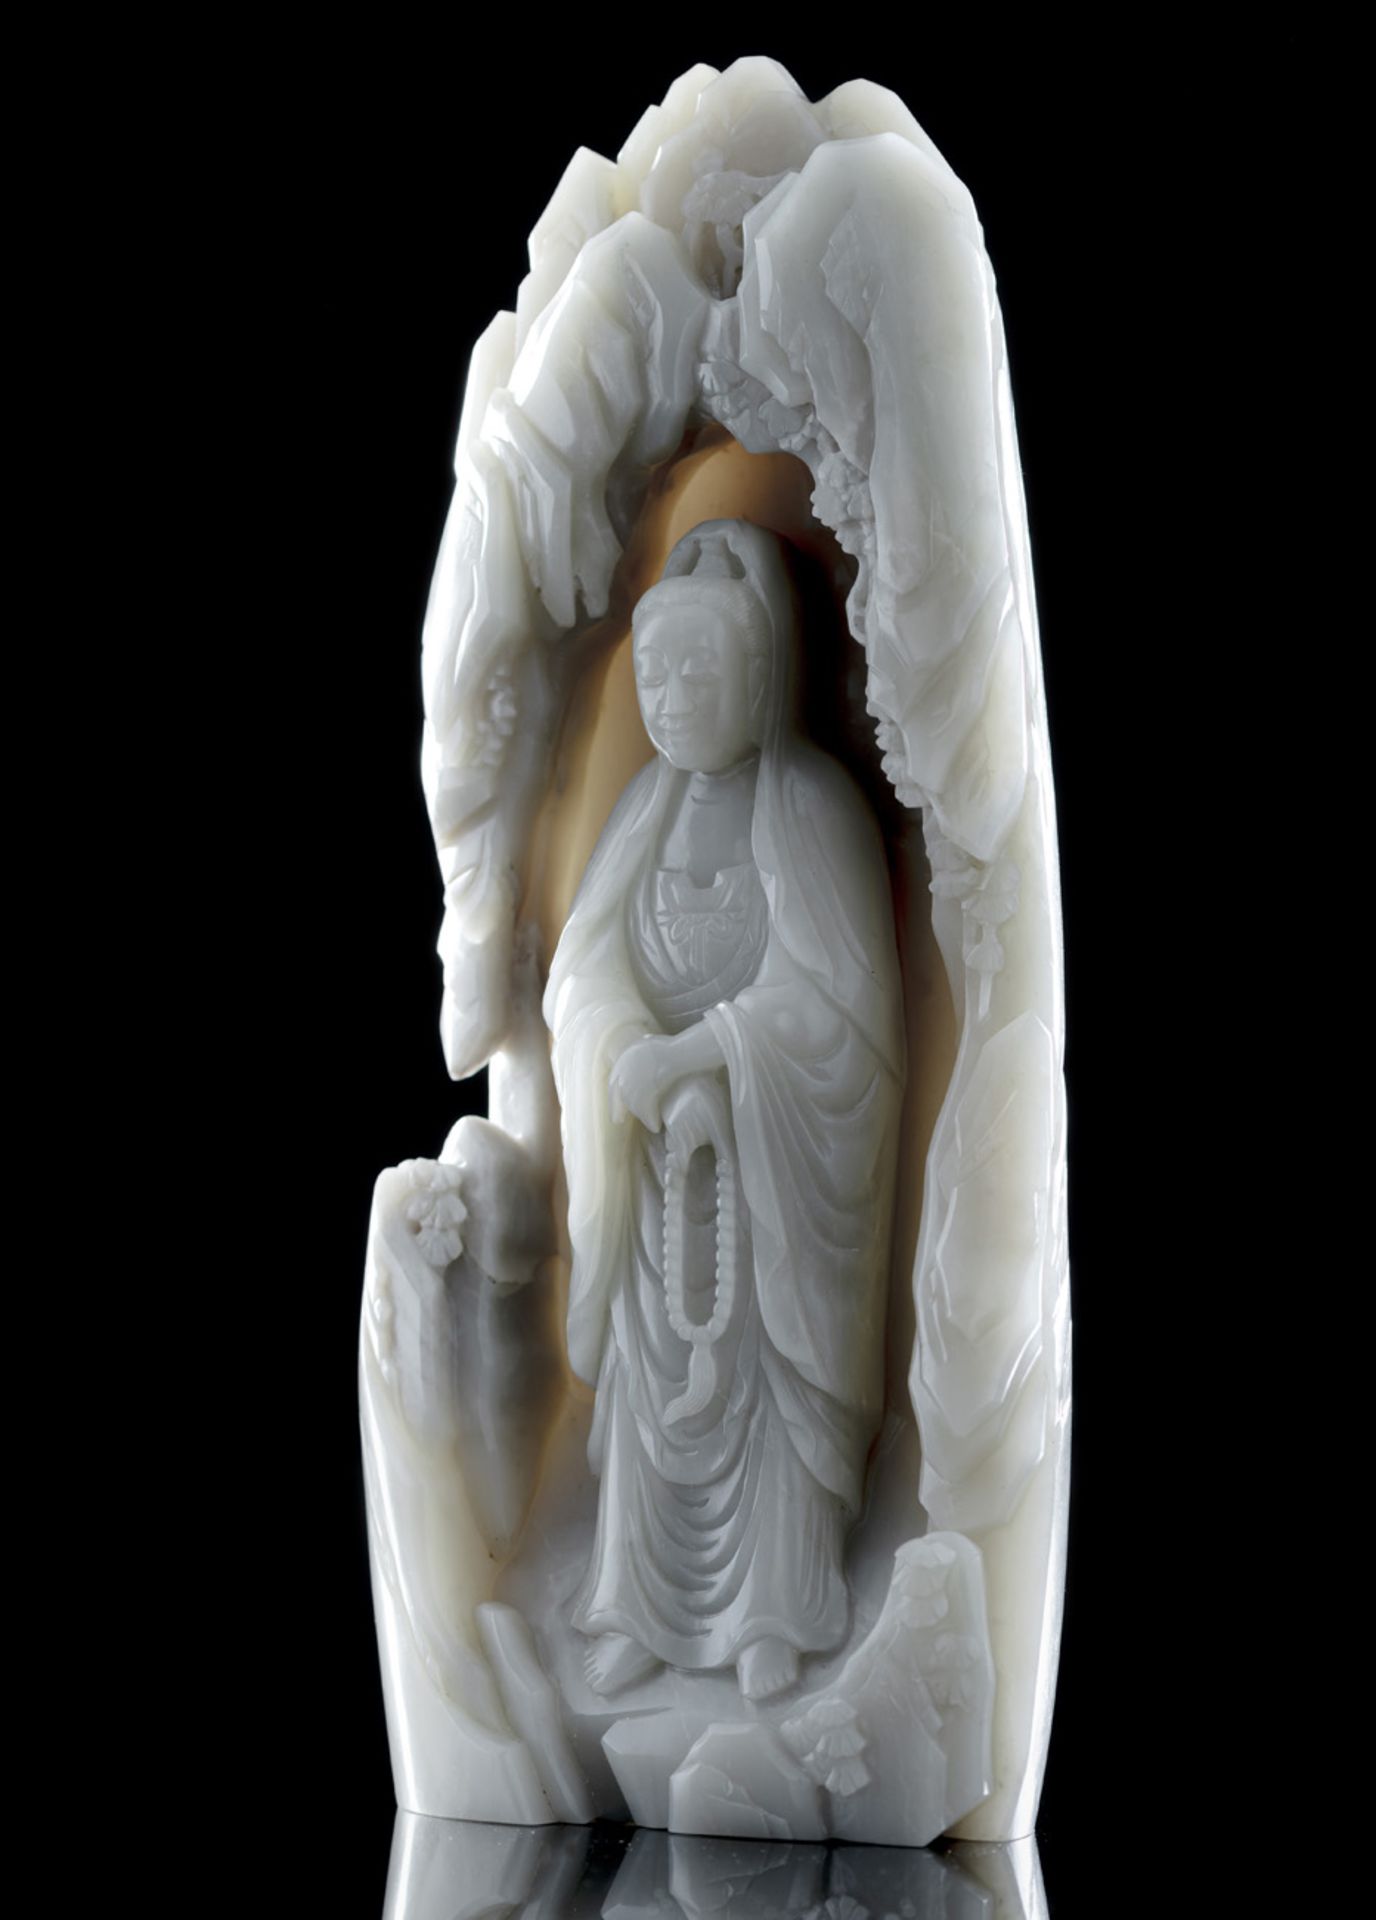 A RARE PALE CELADON JADE FIGURE OF GUANYIN IN A GROTTO - Image 6 of 6